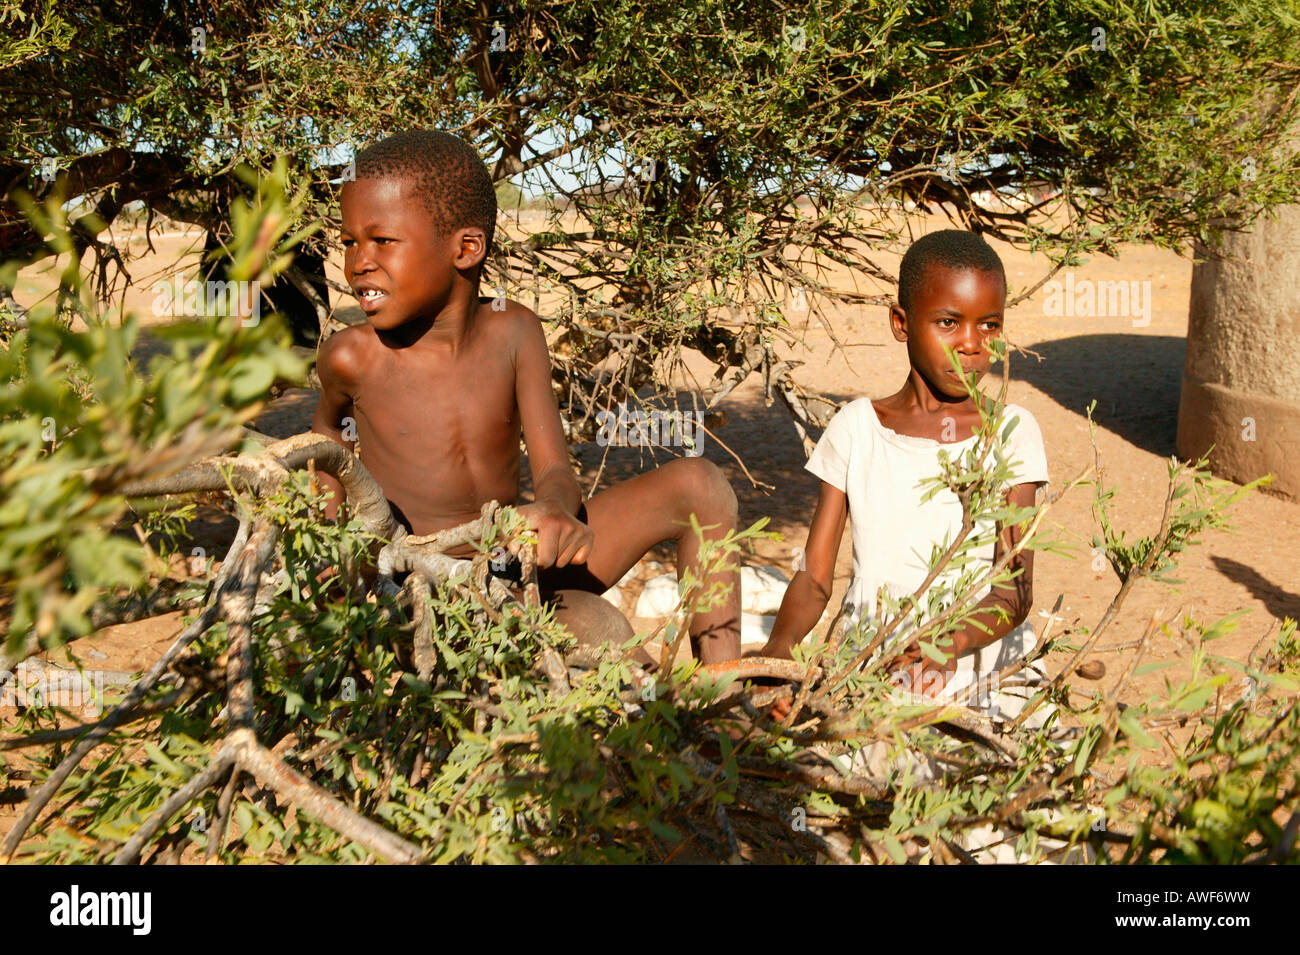 Two boys seesawing on a branch, Cattlepost Bothatogo, Botswana, Africa Stock Photo